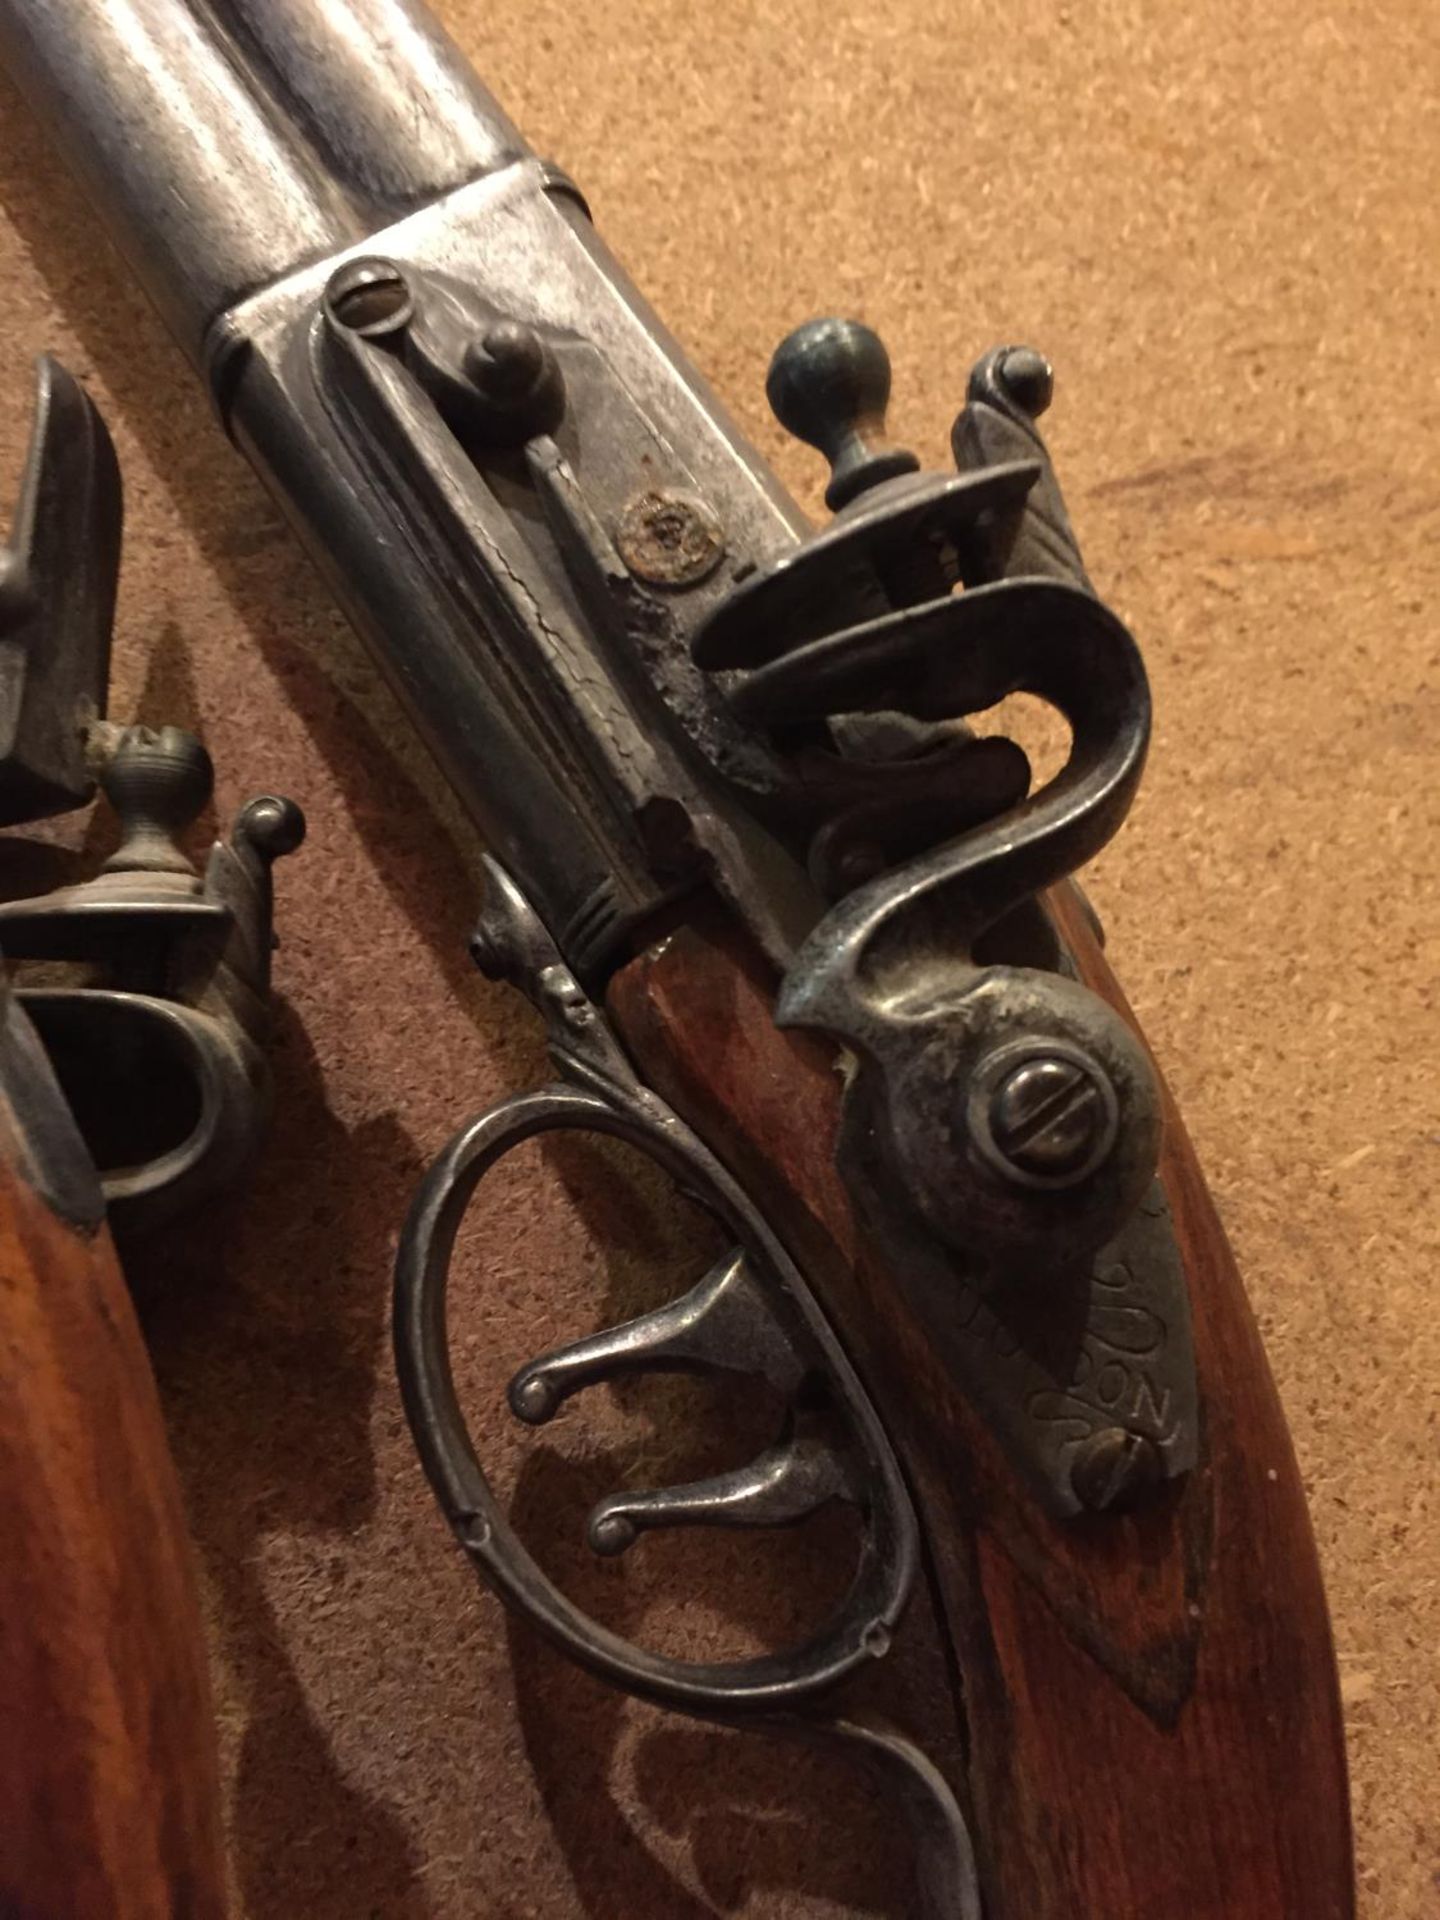 A PAIR OF REPRODUCTION FLINTLOCK PISTOLS AND A KNIFE IN AN ORNATE SHEATH - Image 10 of 12